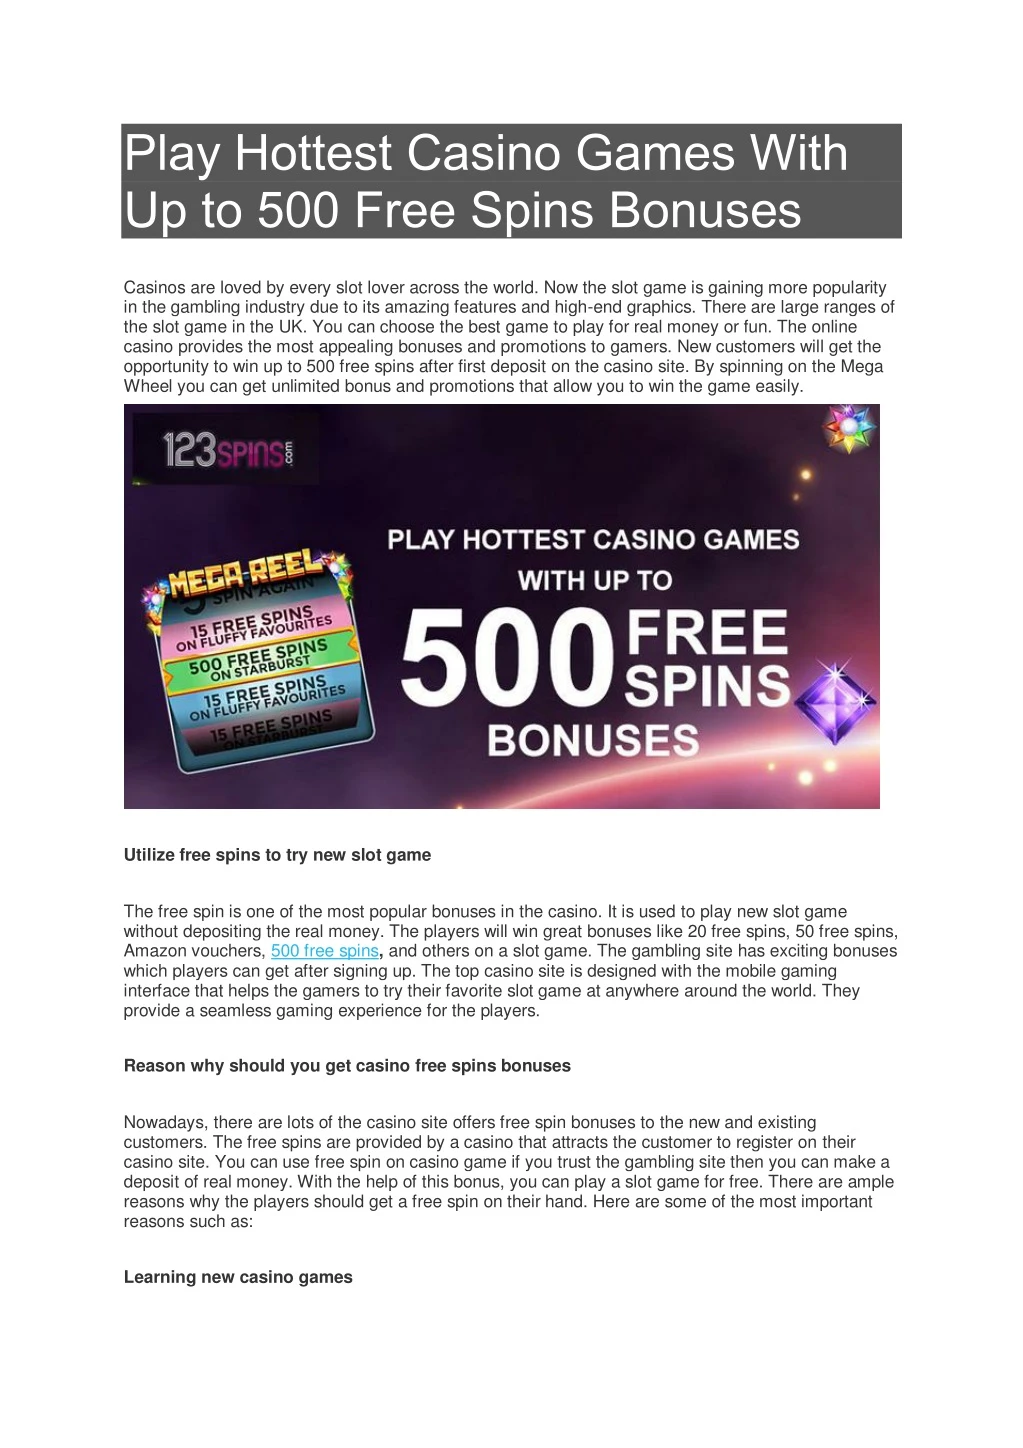 play hottest casino games with up to 500 free